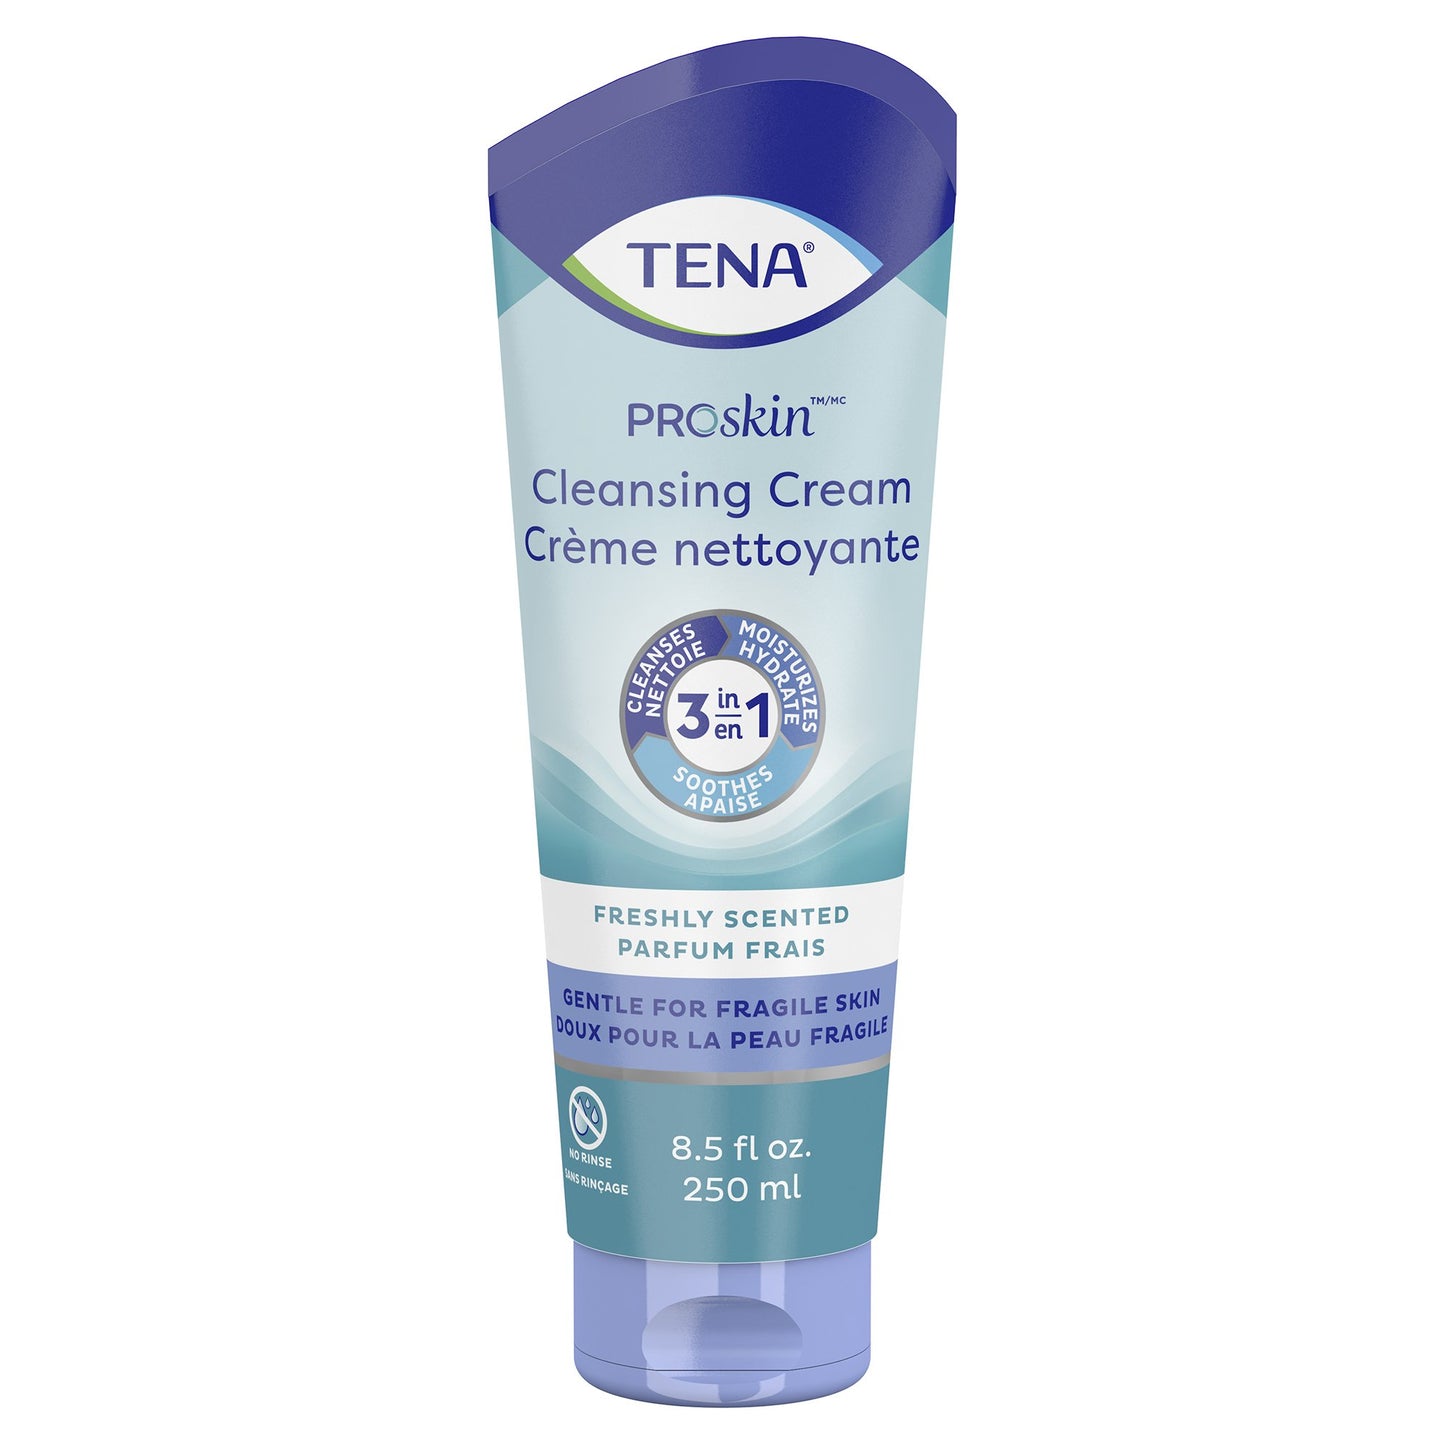 TENA Unscented Cleansing Cream, 8.5 oz. Tube